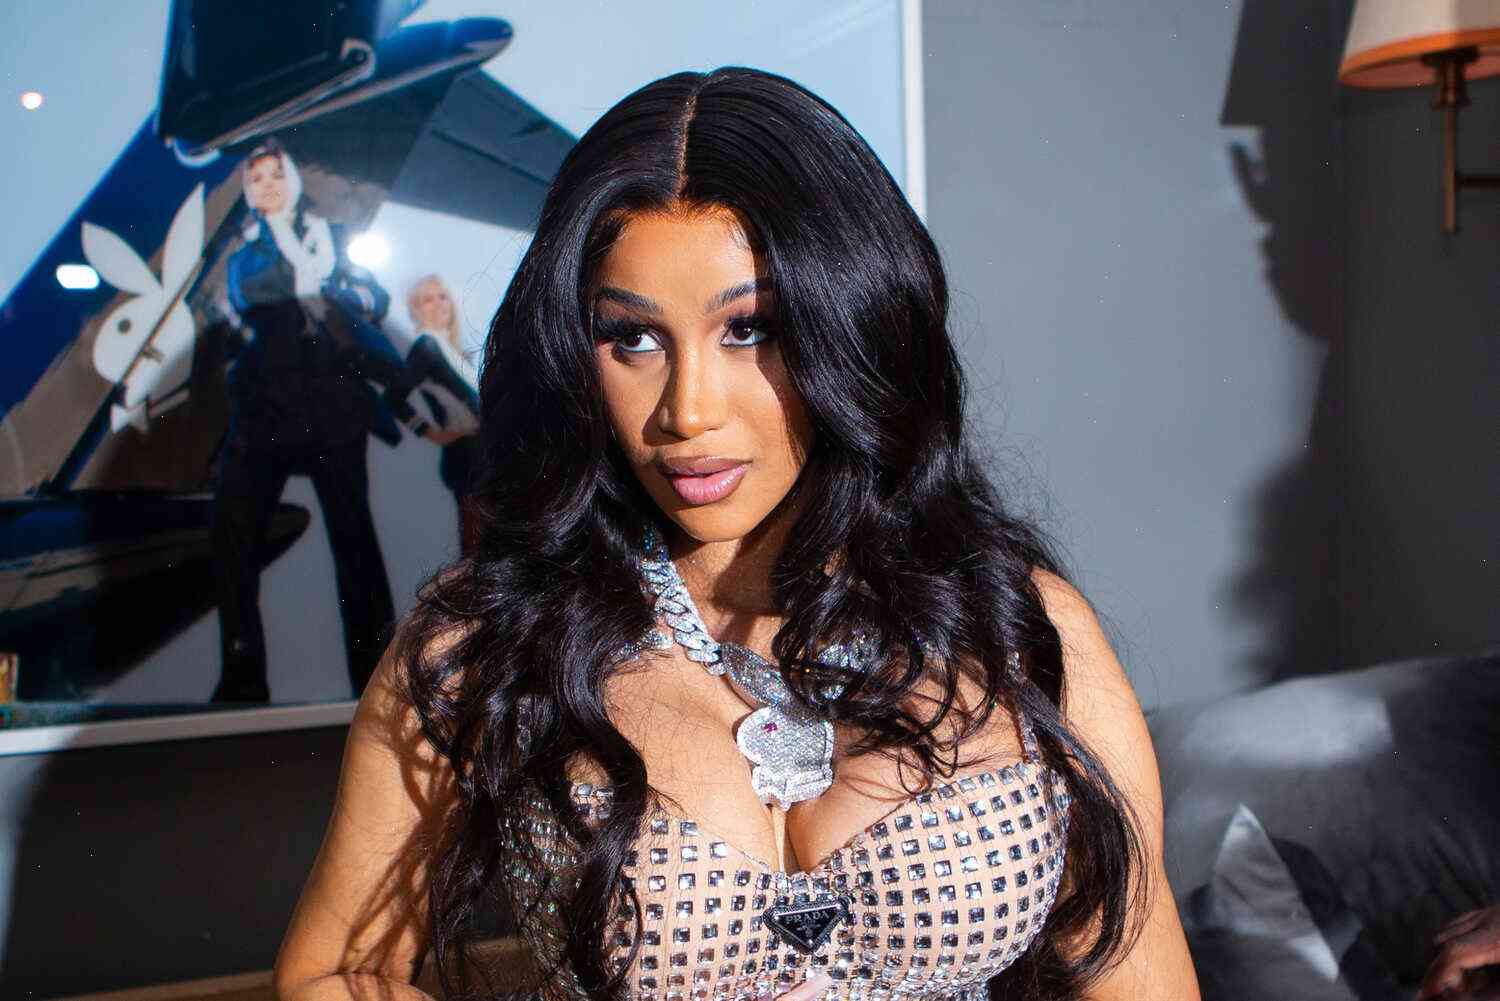 Meet Cardi B’s weekend in Miami, from nightclub appearances to a party that was closed down